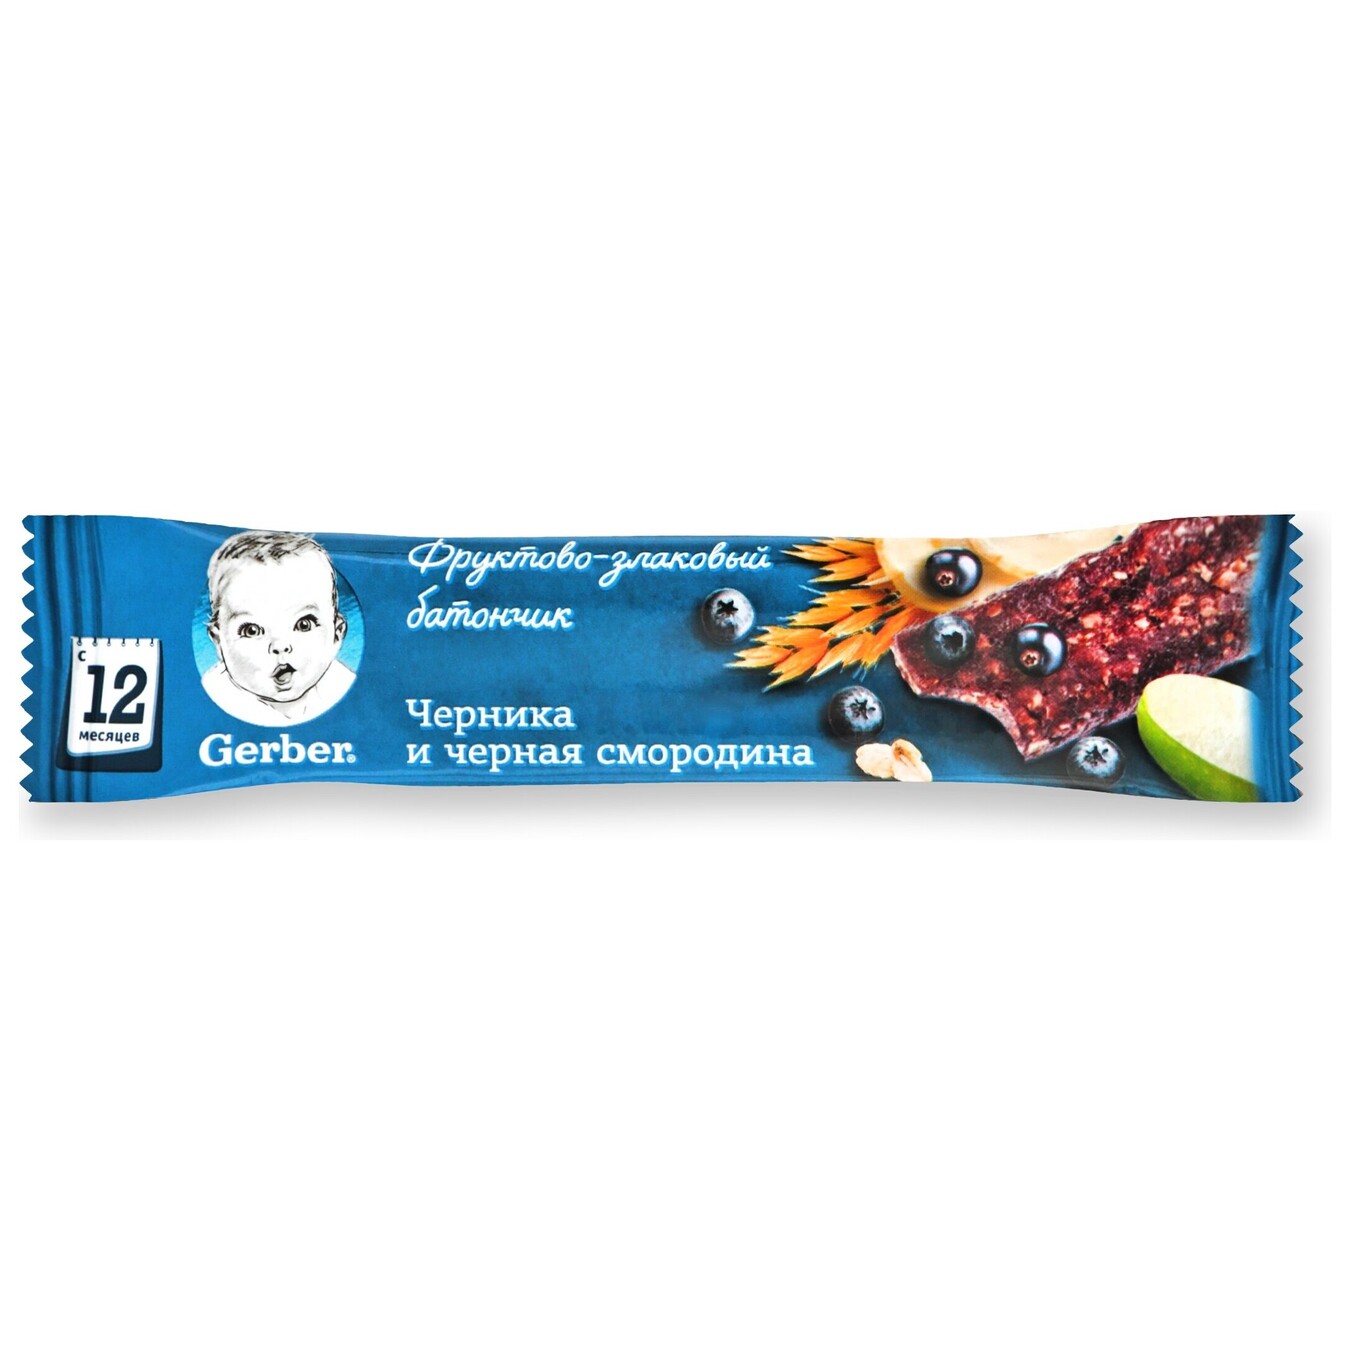 Gerber Fruit Cereal Bar with Blueberries and Black Currant 25g